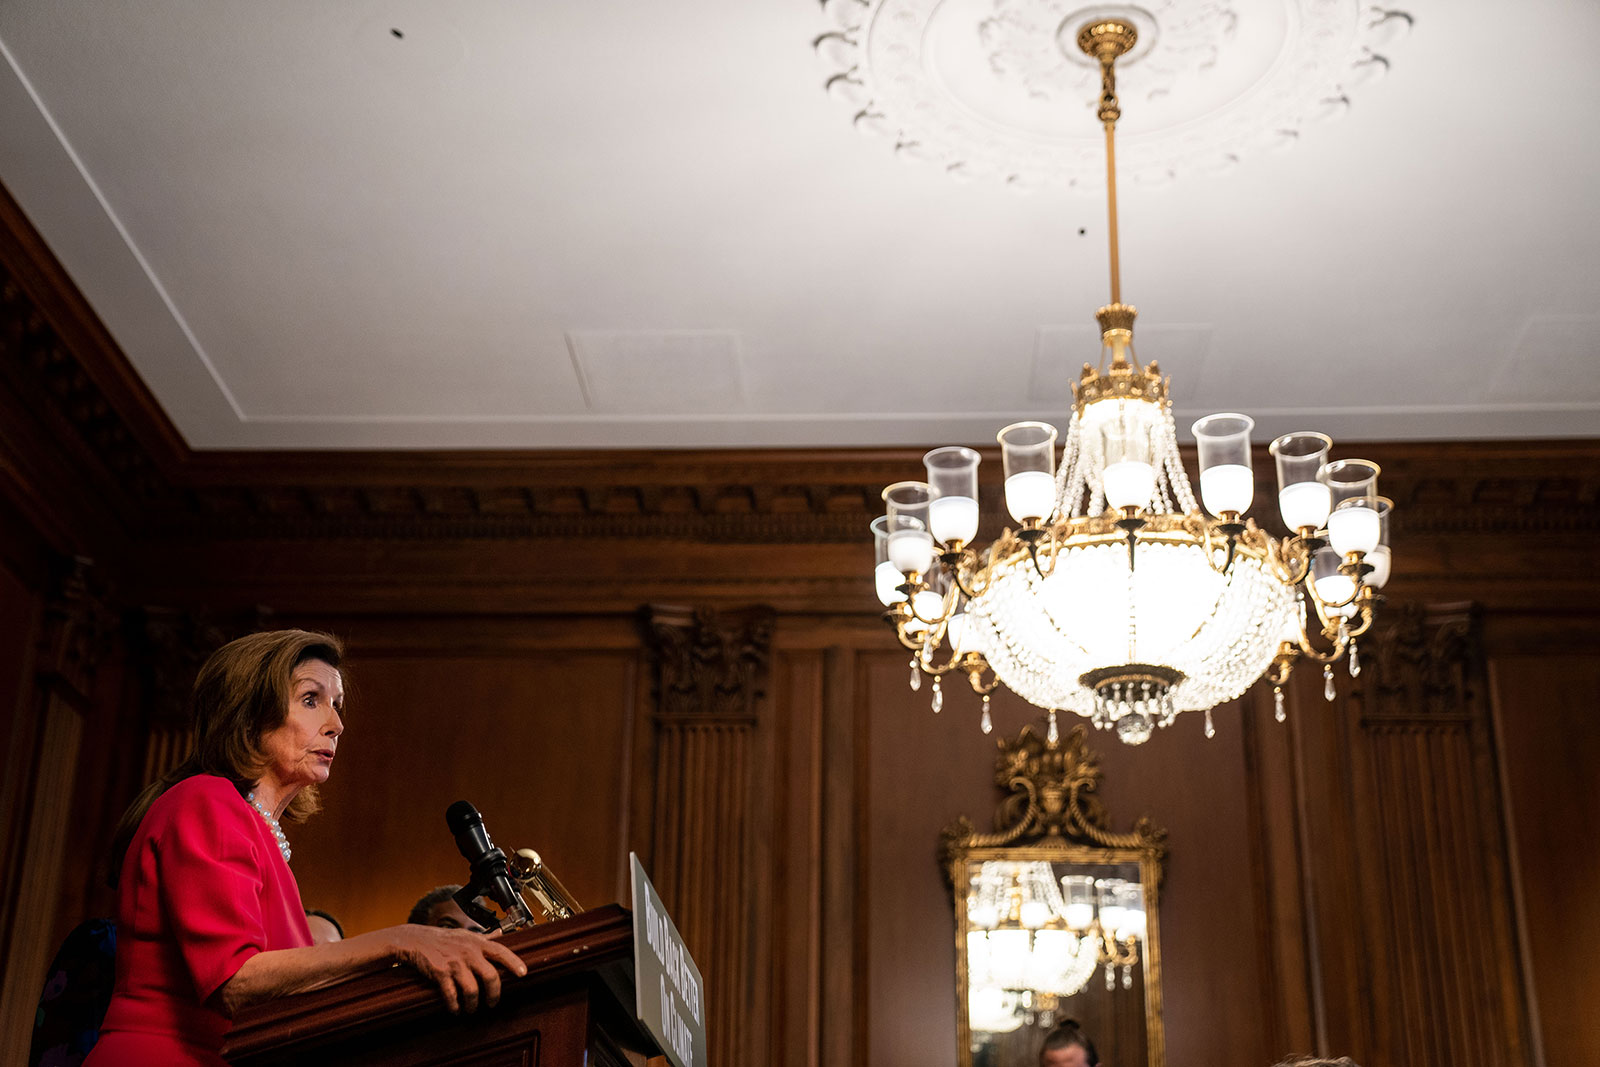 House Speaker Nancy Pelosi delivers remarks during a press conference at the US Capitol on Tuesday, September 28.